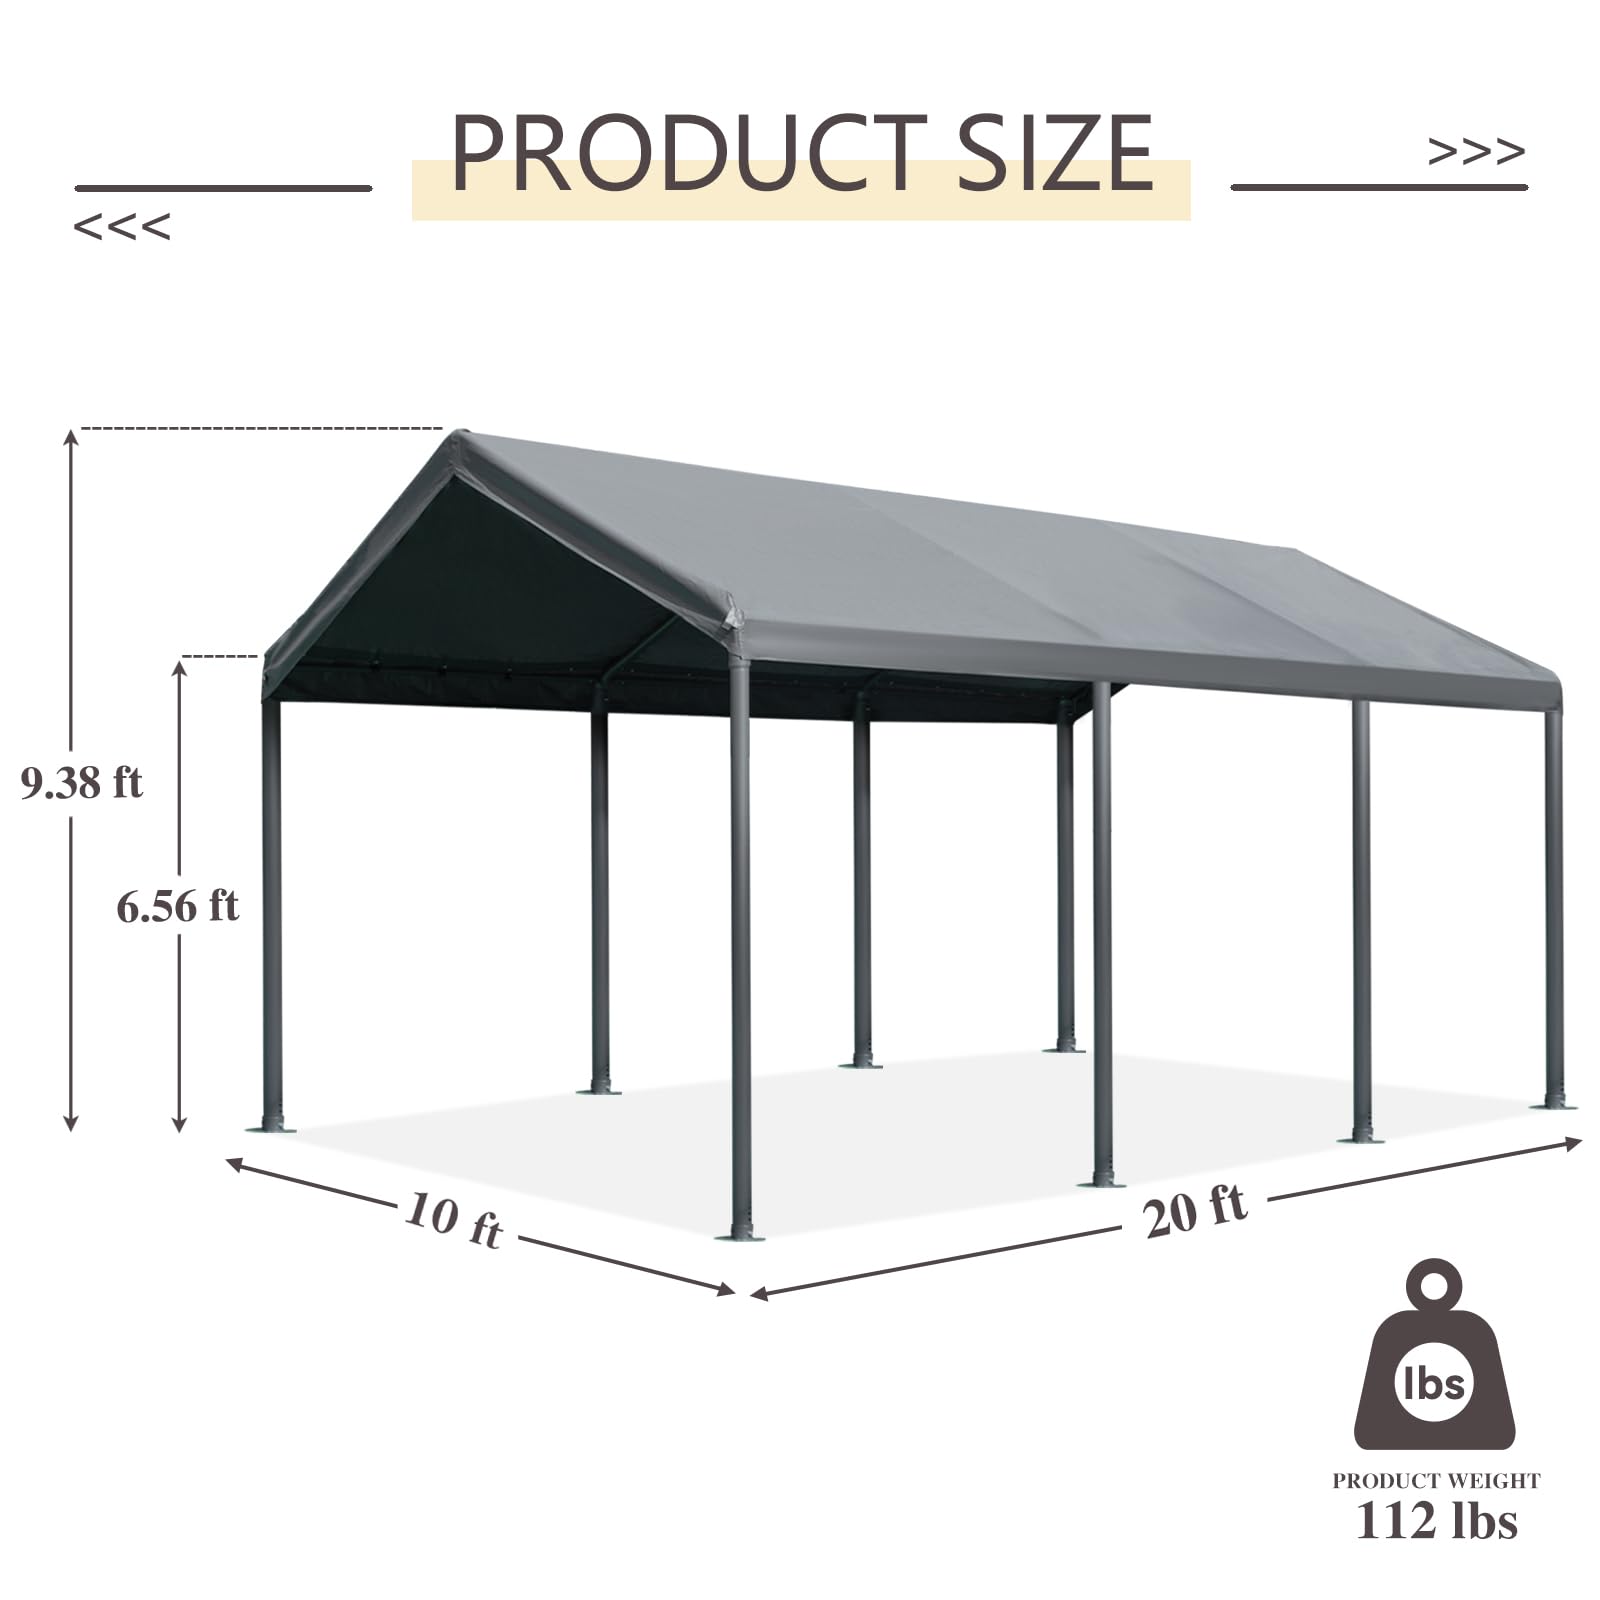 Gardesol Carport, 10’ X 20’ Heavy Duty Car Canopy with Powder-Coated Steel Frame, Easy to Assemble Portable Garage for Car, Boat, Party Tent with 180g PE Tarp for Wedding, Garden, 8 Legs, Gray